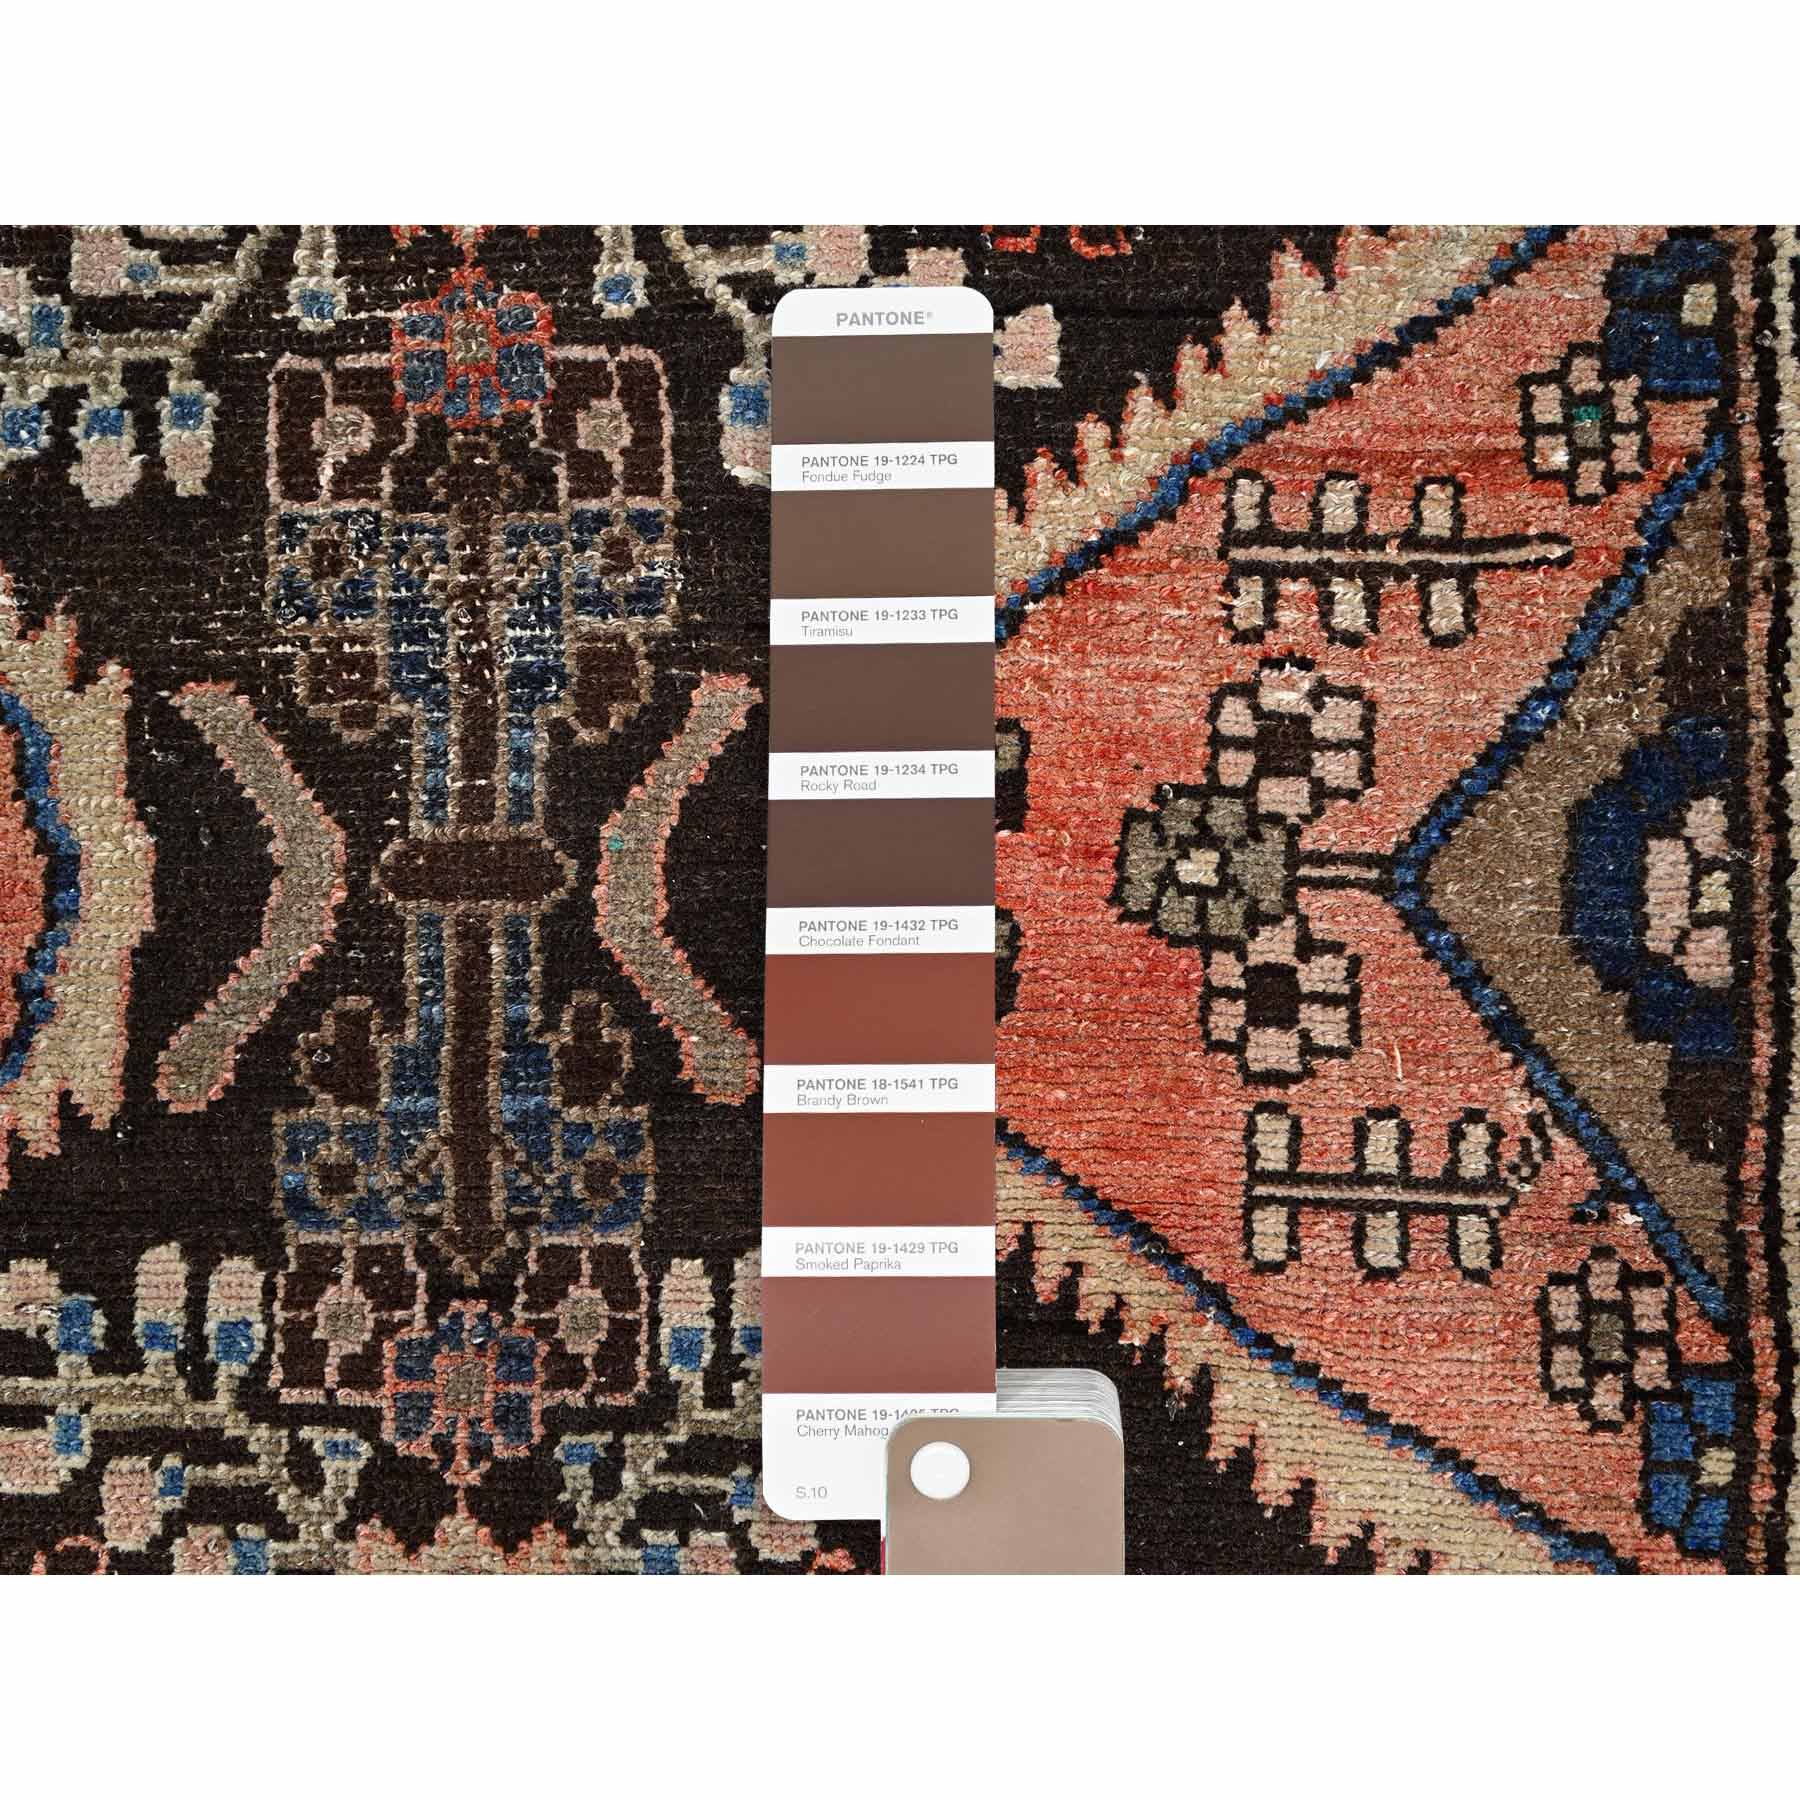 Overdyed-Vintage-Hand-Knotted-Rug-429800